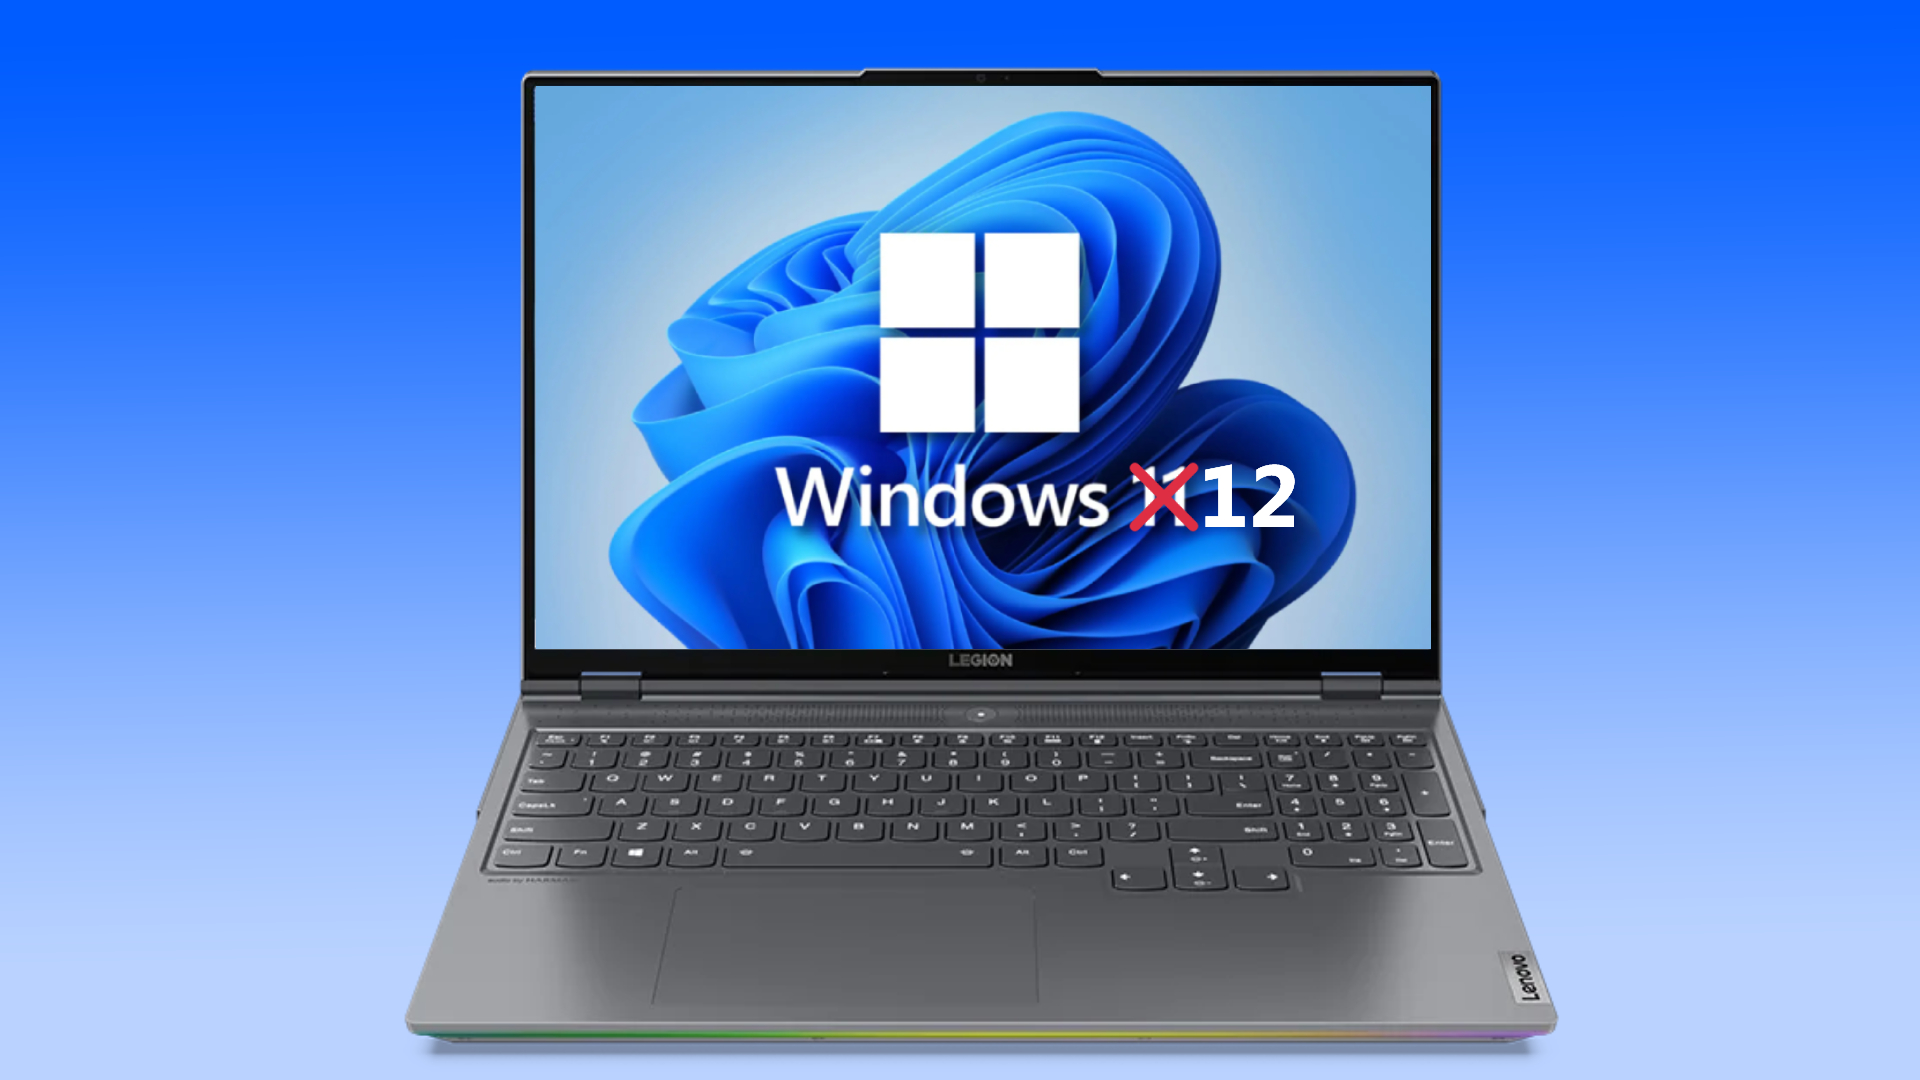 Forget Windows 11, Windows 12 is apparently releasing soon